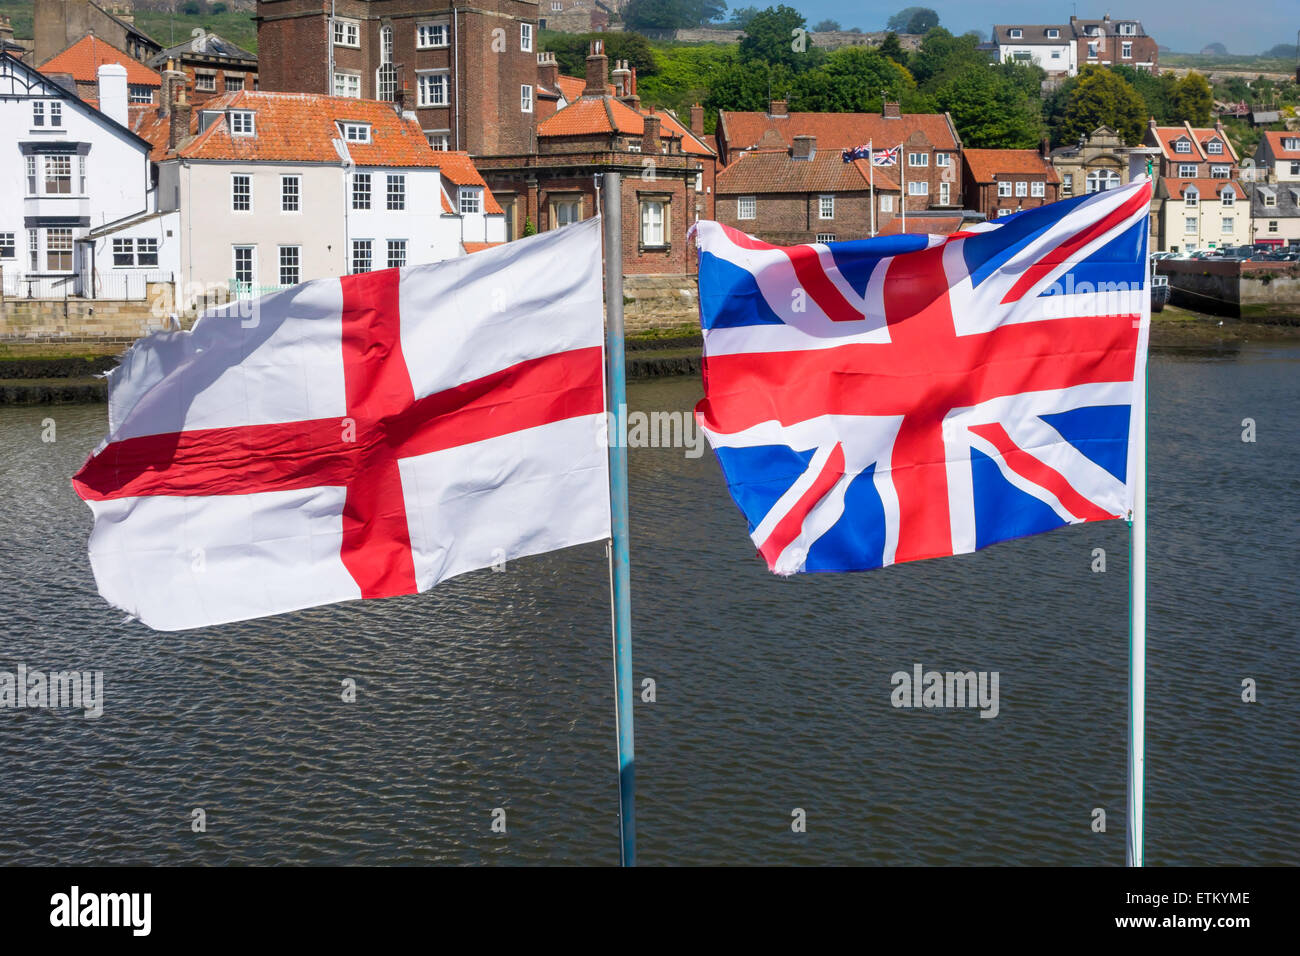 The United Kingdom flag and the England flag St George's cross flying side by side at Whitby Harbour Stock Photo